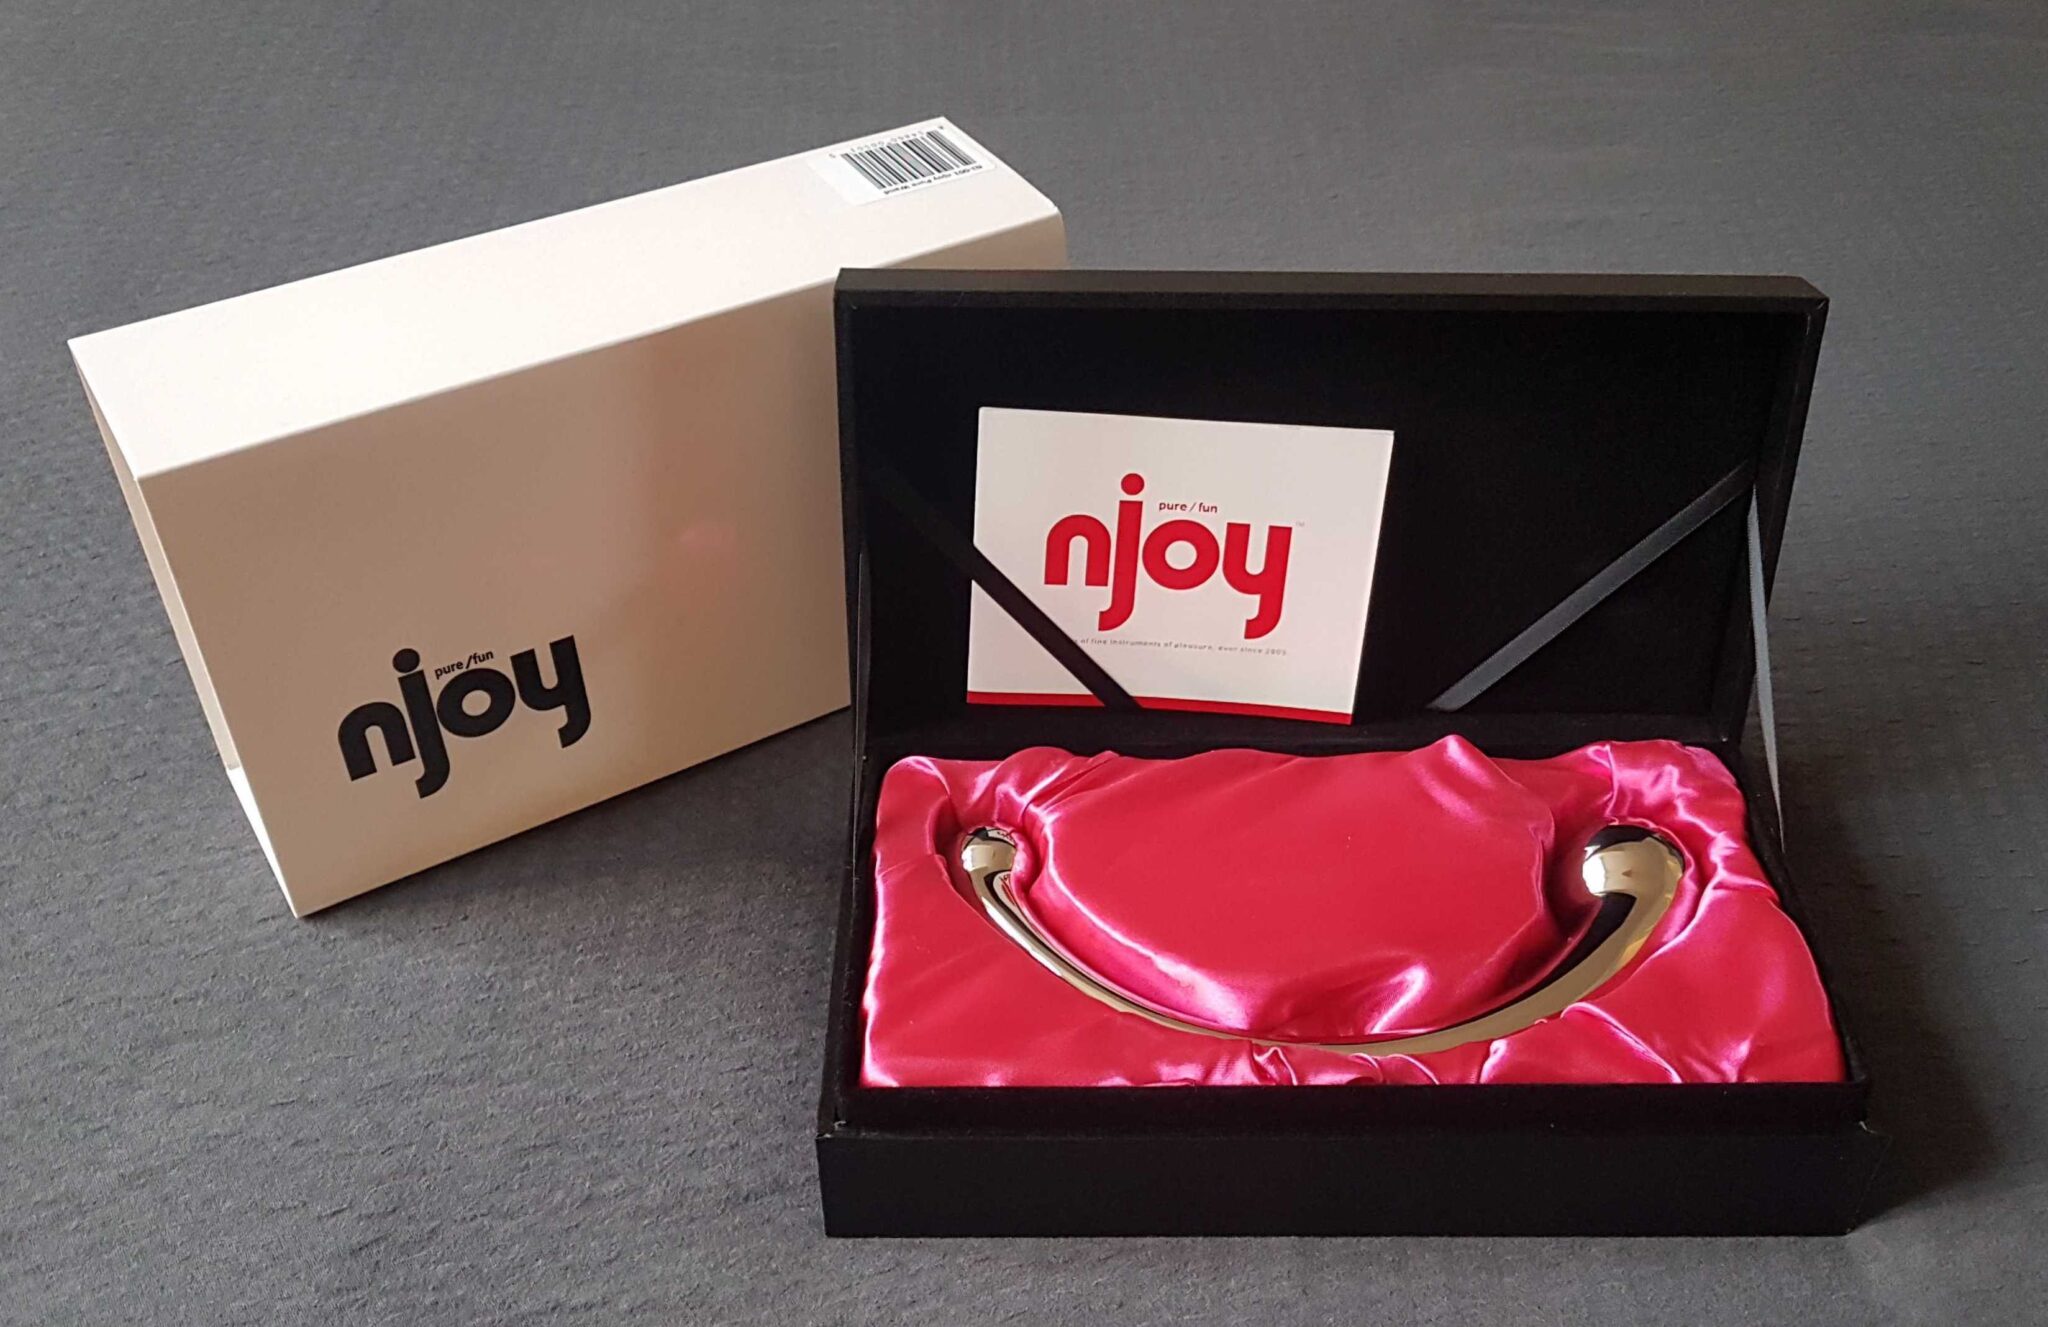 Njoy Pure Wand Stainless Steel Dildo. Slide 2